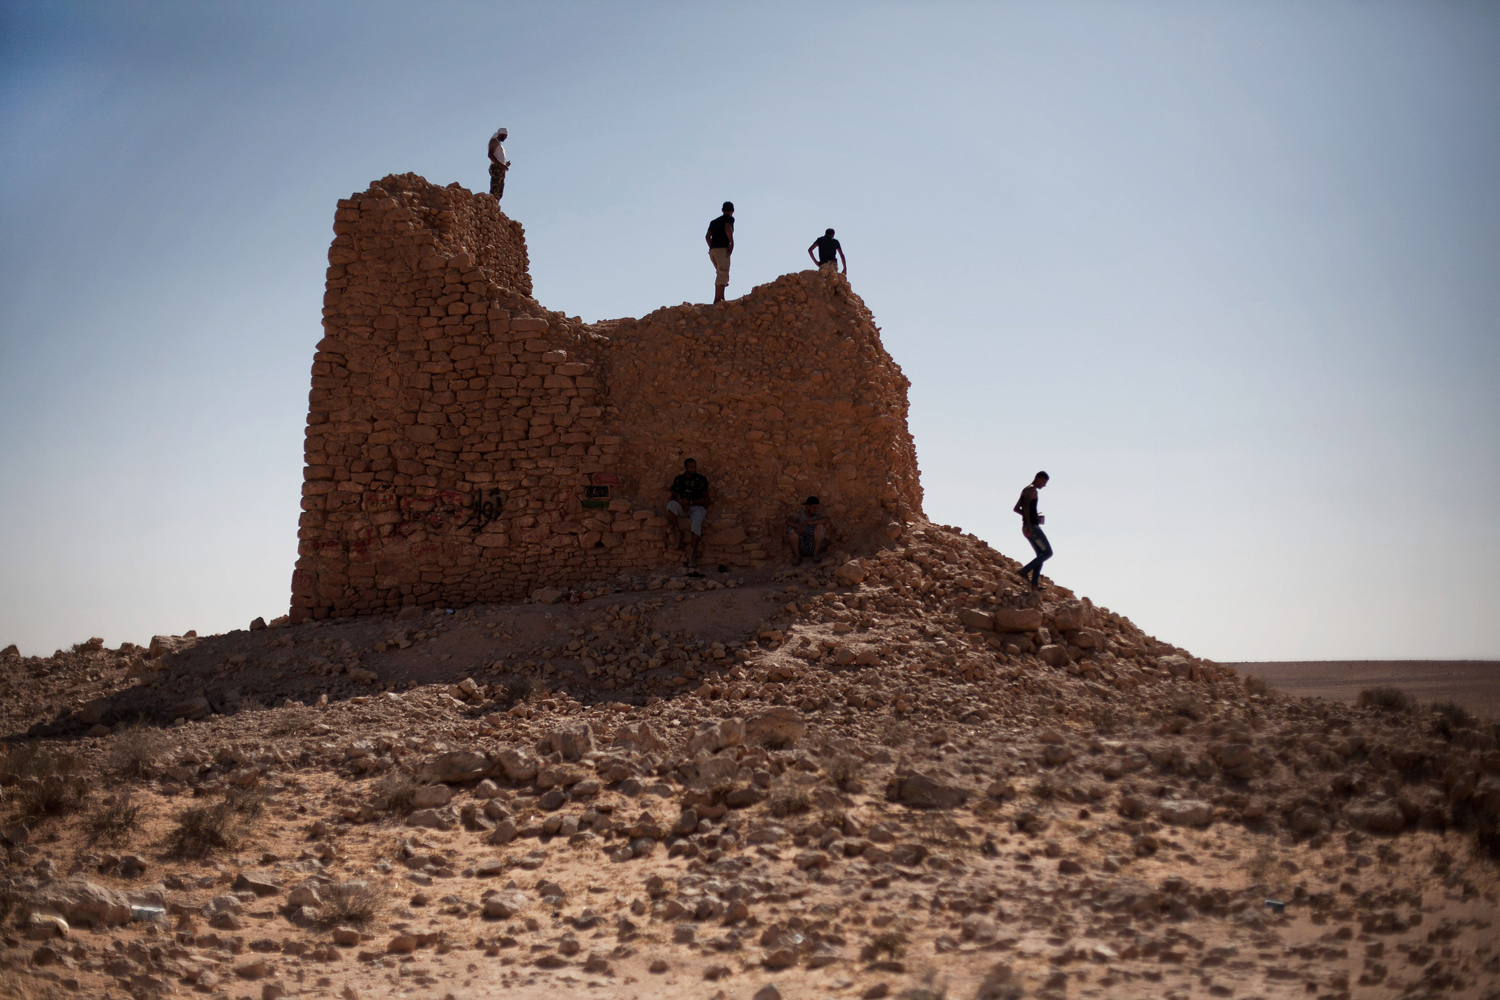 July 14, 2012. Libyan militia men scan the desert at the top of an old Italian defense tower during a patrol in the Bir Doufan area, on the border between Misrata and Bani Walid, Libya.